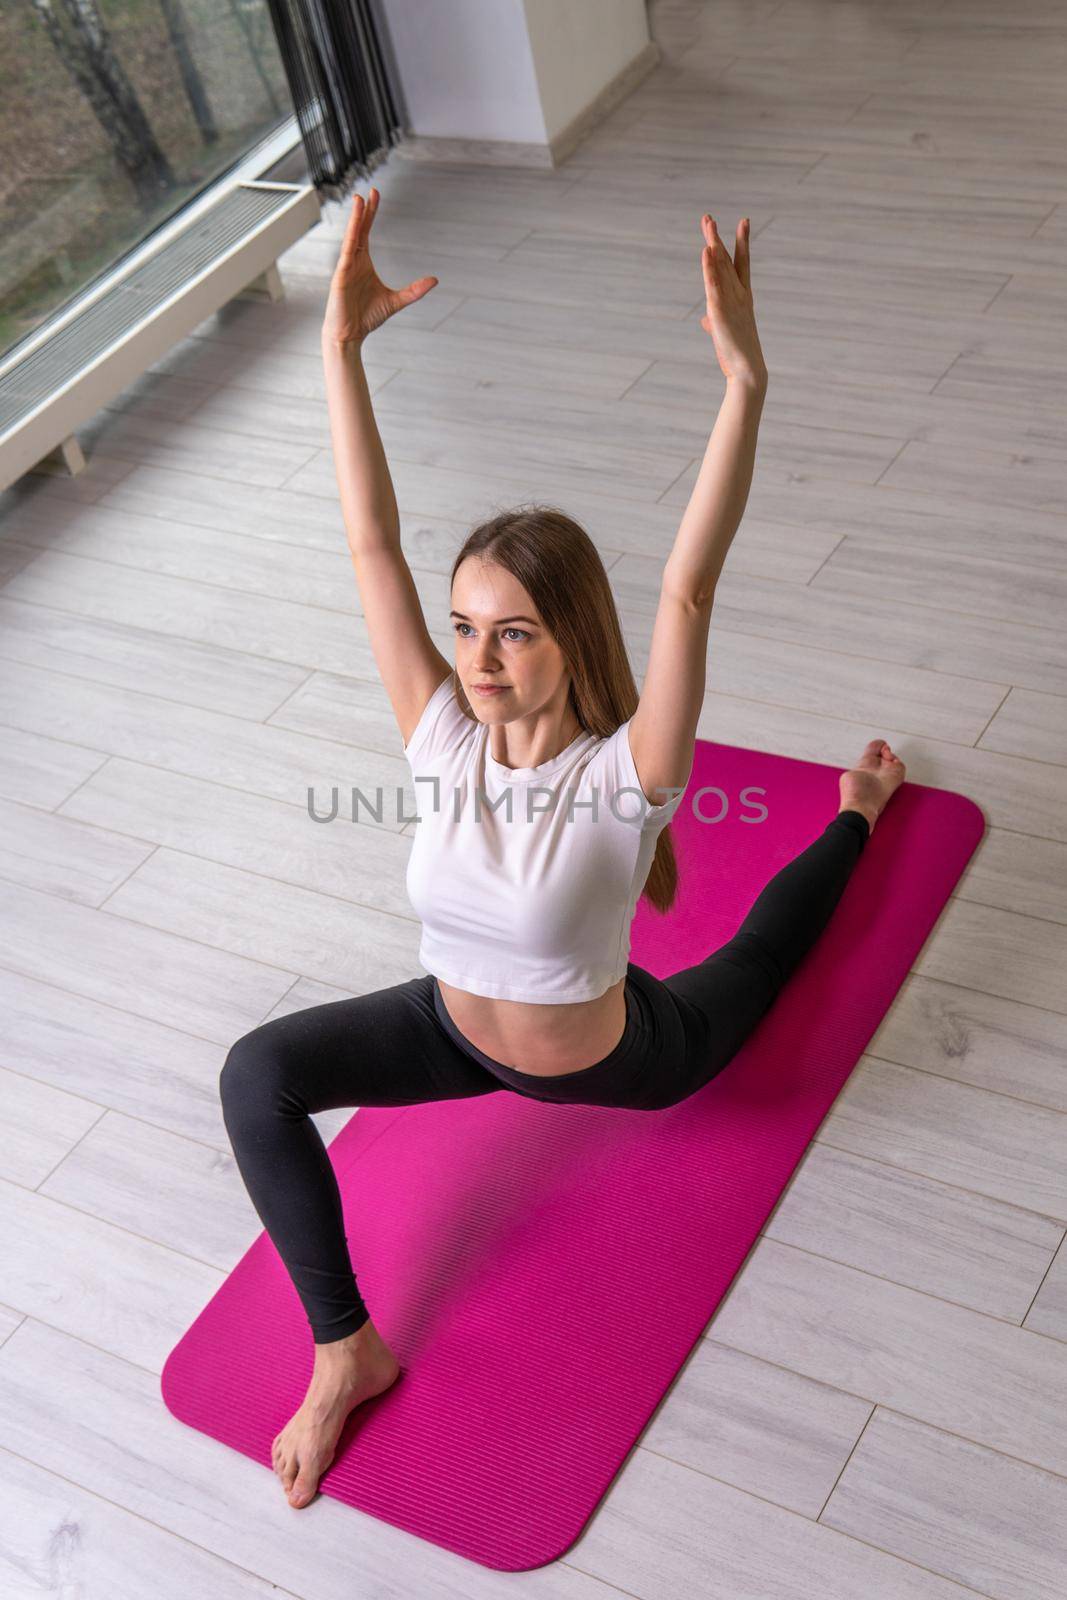 A exercises a a in fitness on shows girl mat club fitness window mfr, from home indoor for active and lifestyle body, pilates girl. Happy position copy, shape smiling practicing pose